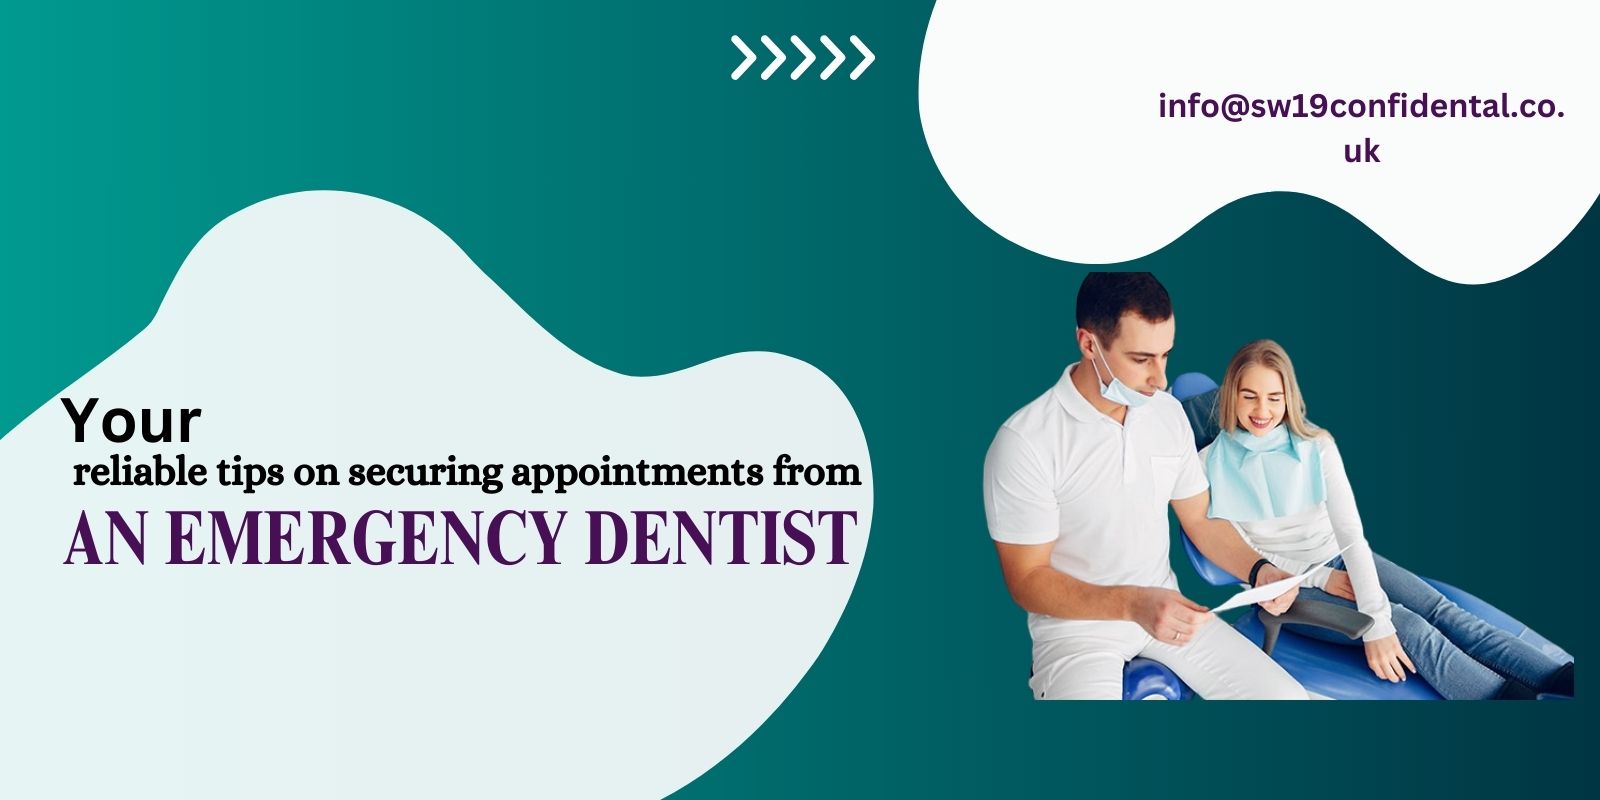 Your reliable tips on securing appointments from an emergency dentist.